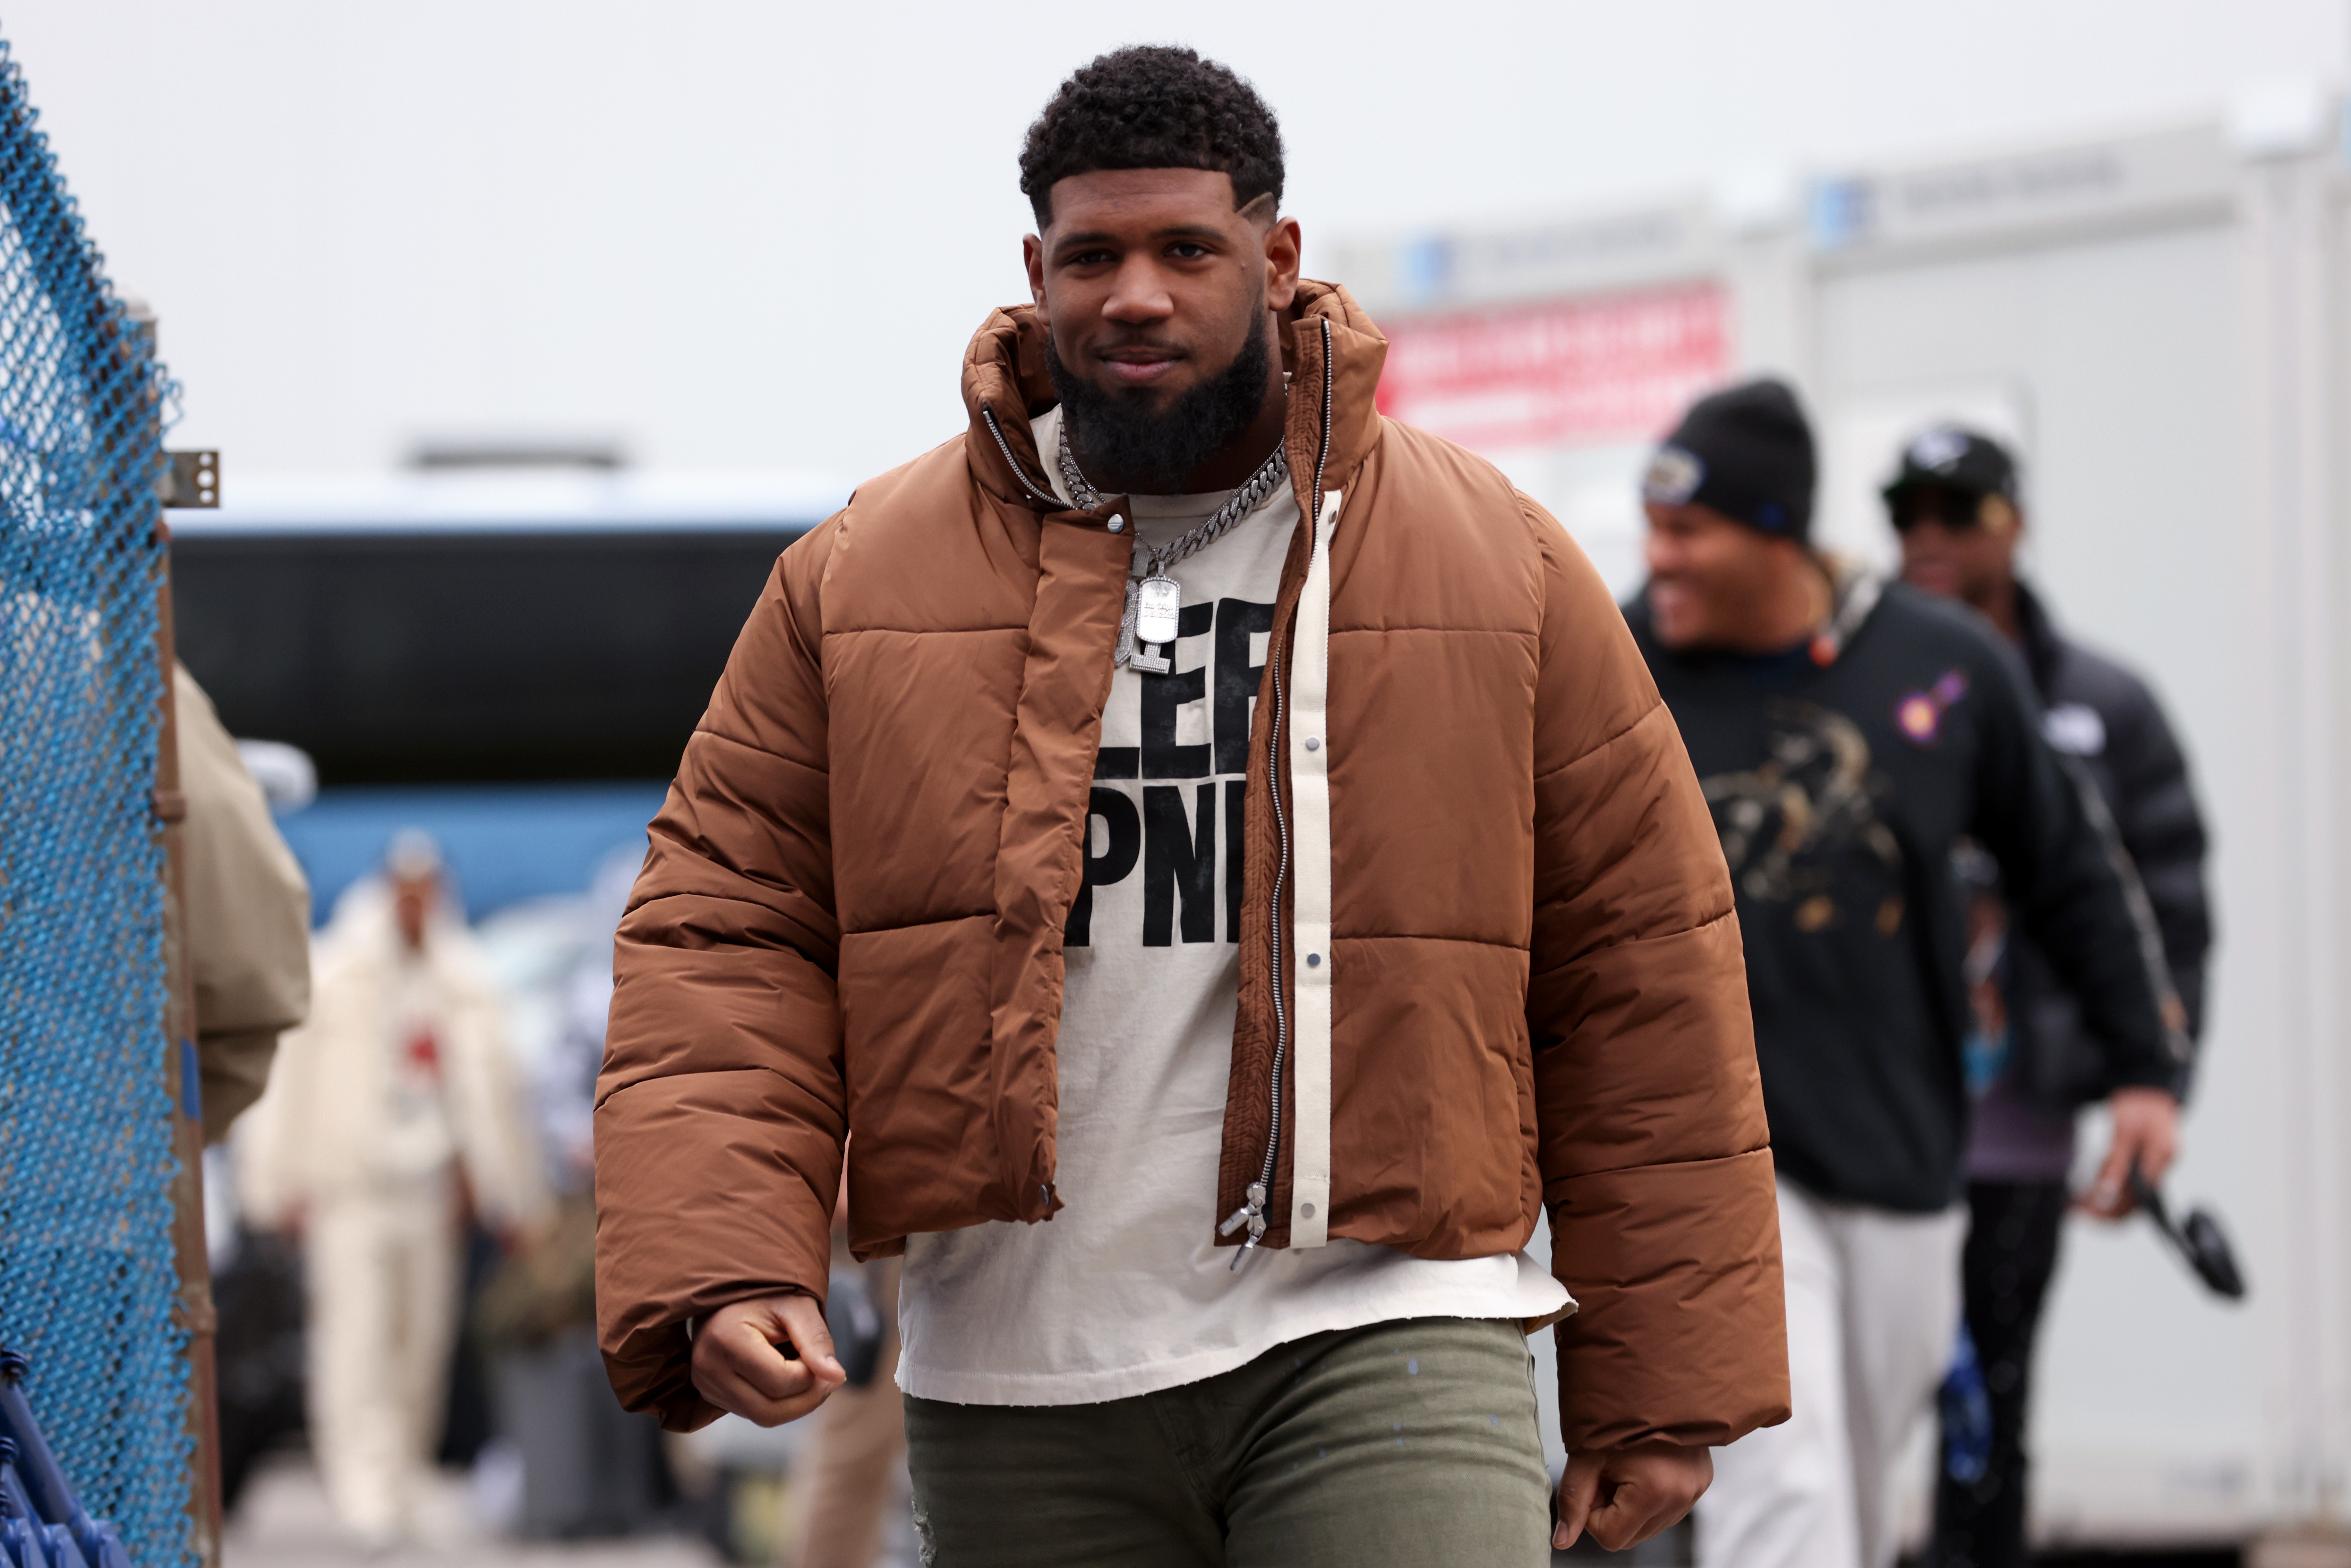 Defensive tackle Ed Oliver of the Buffalo Bills looks on ahead of the game against the Cincinnati Bengals in the American Football Conference Divisional Game at Highmark Stadium in Orchard Park, New York, January 22, 2023. /CFP 